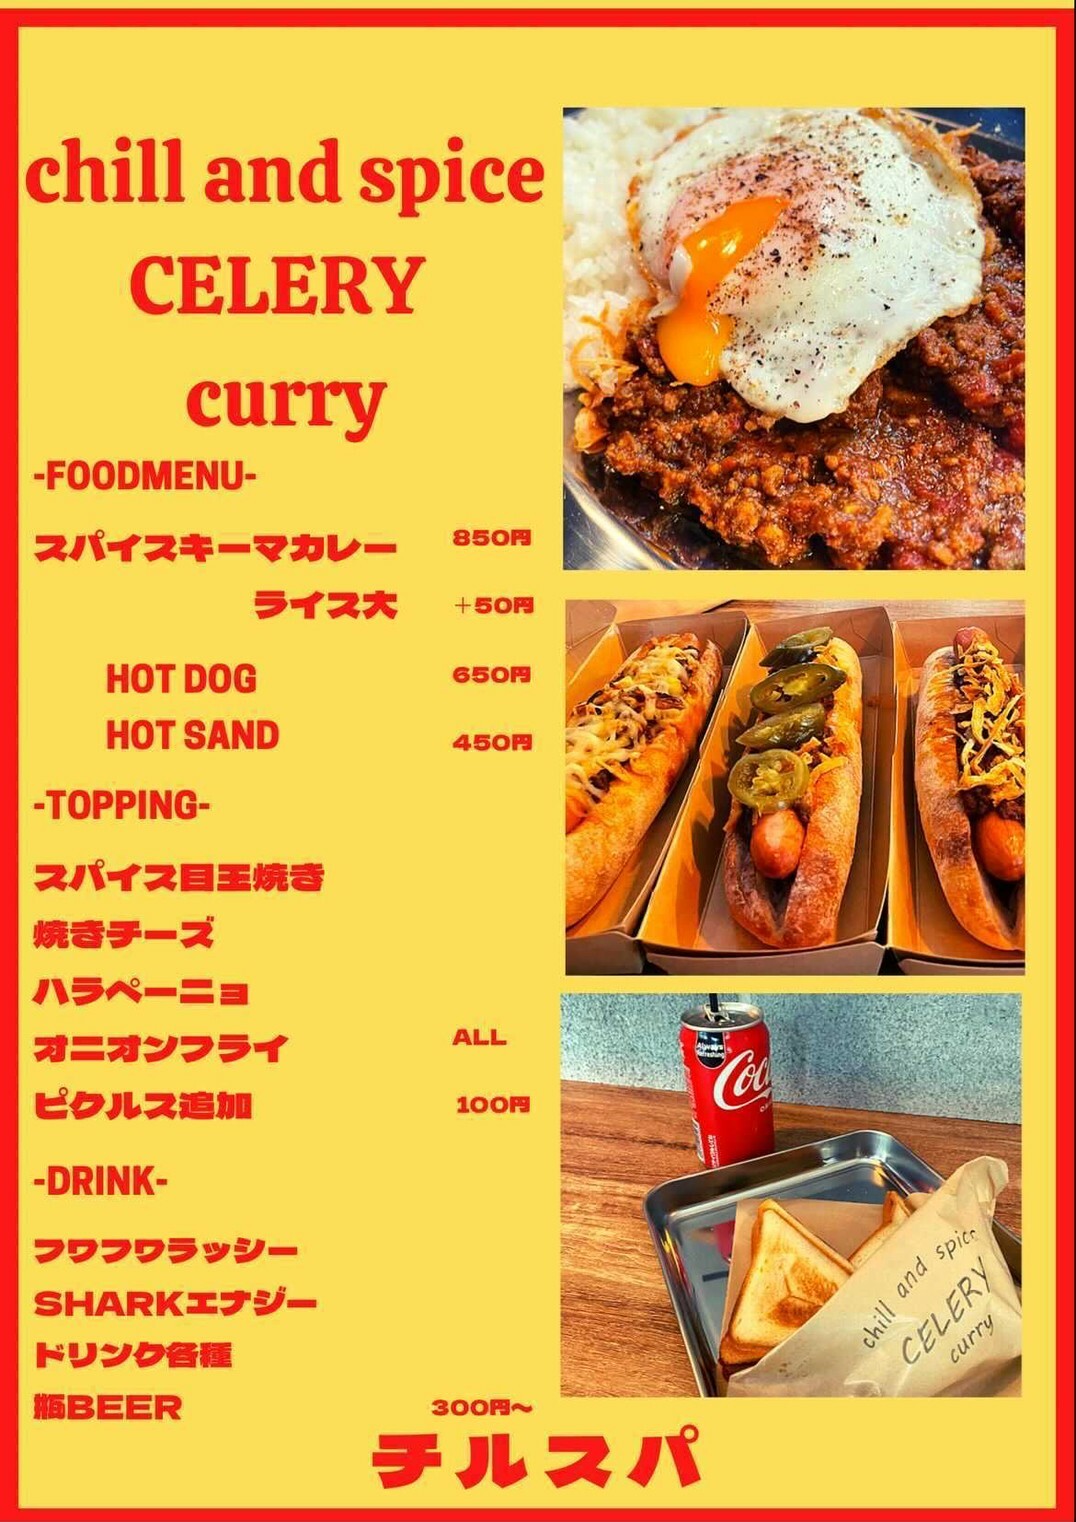 chill and spice CELERY Curry提供